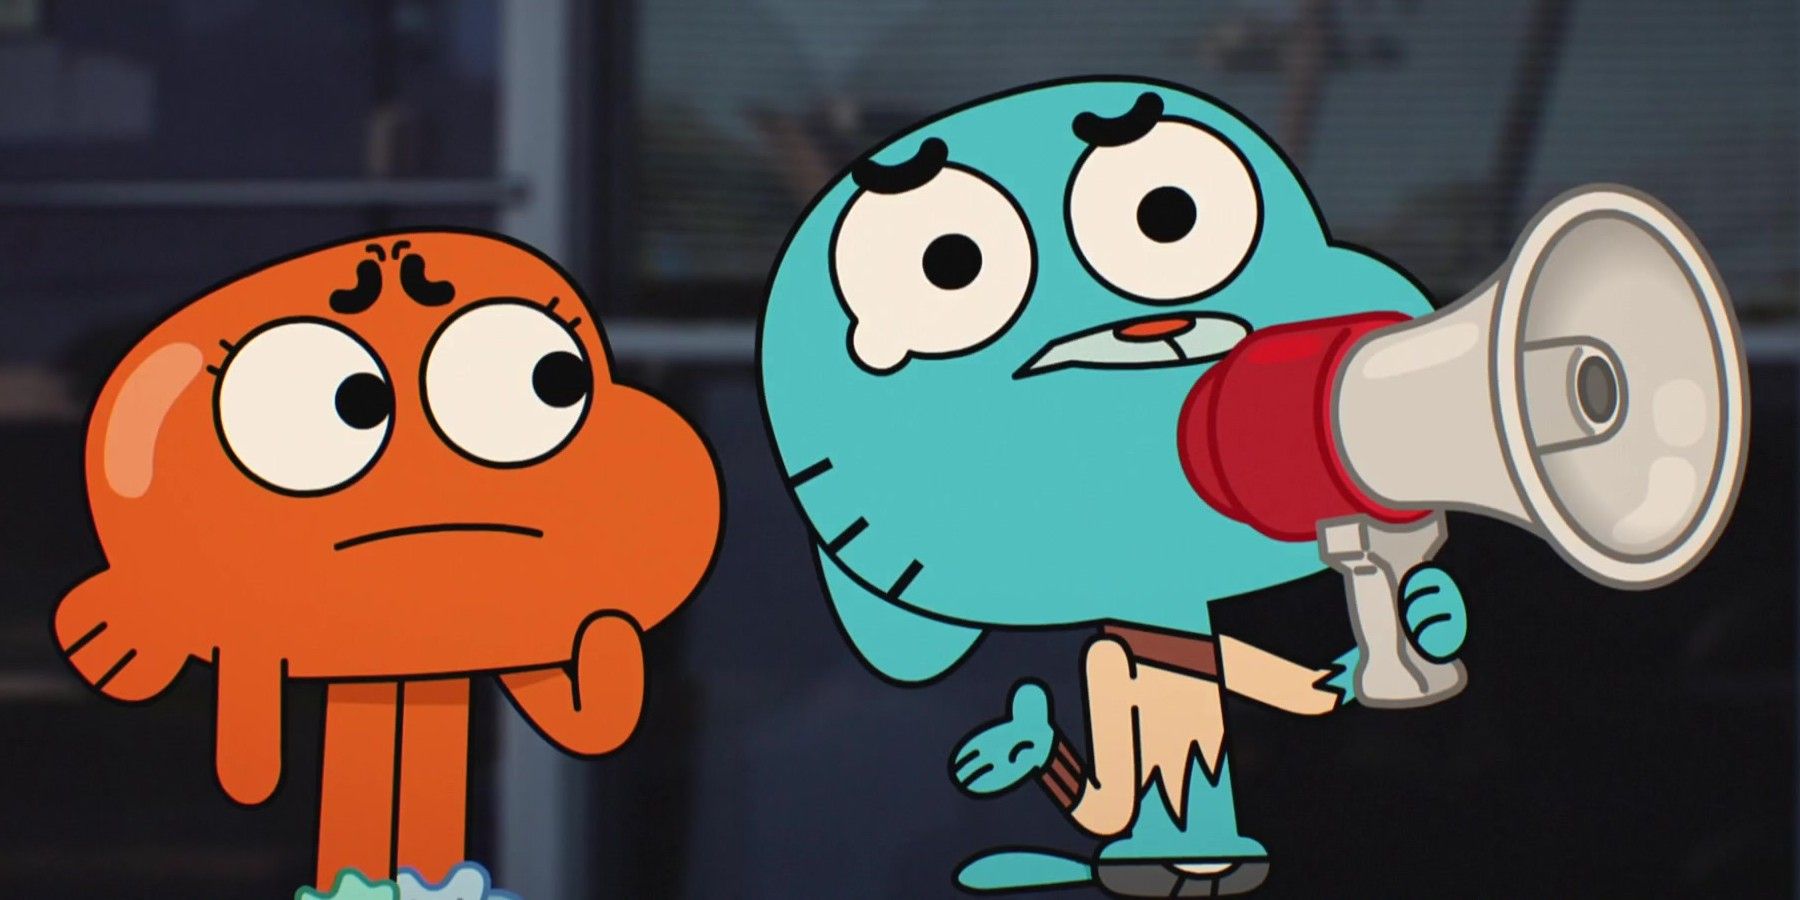 The Amazing World of Gumball Season 7 Release Window Gets Announced